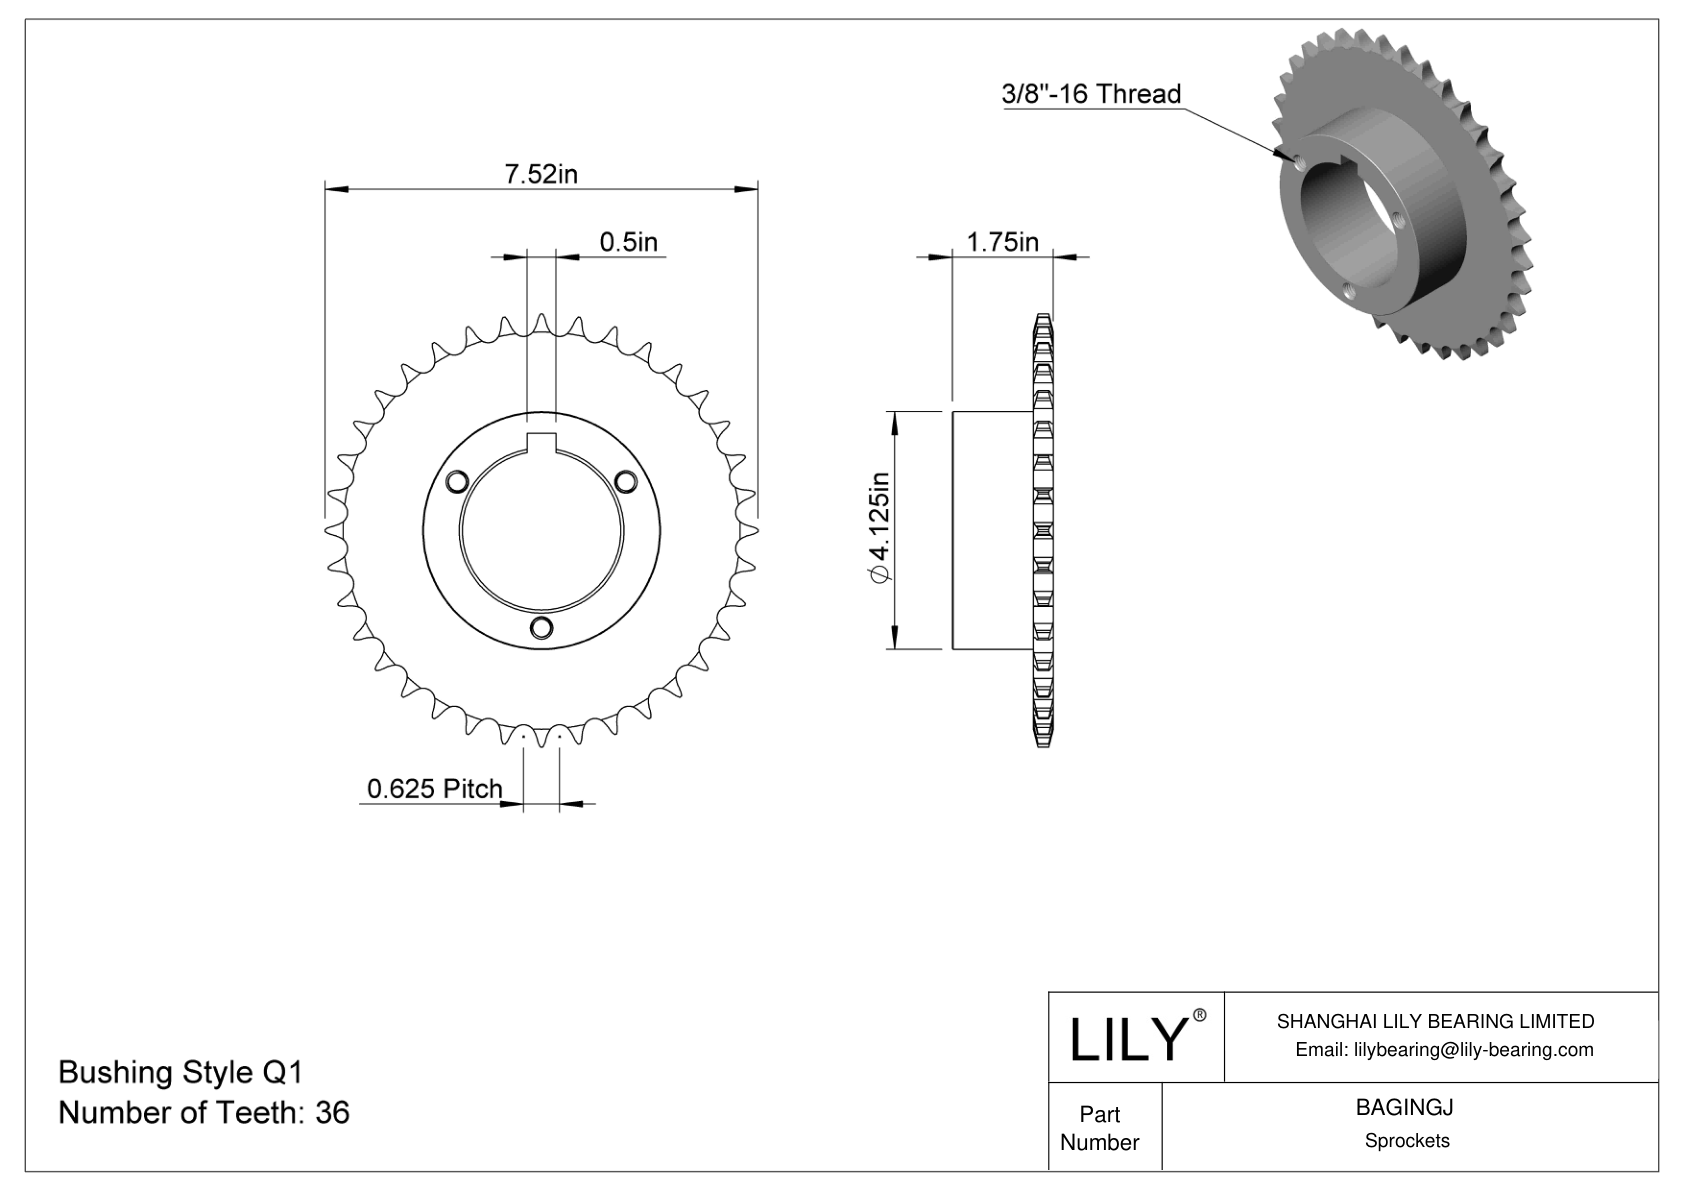 BAGINGJ Split-Tapered Bushing-Bore Sprockets for ANSI Roller Chain cad drawing